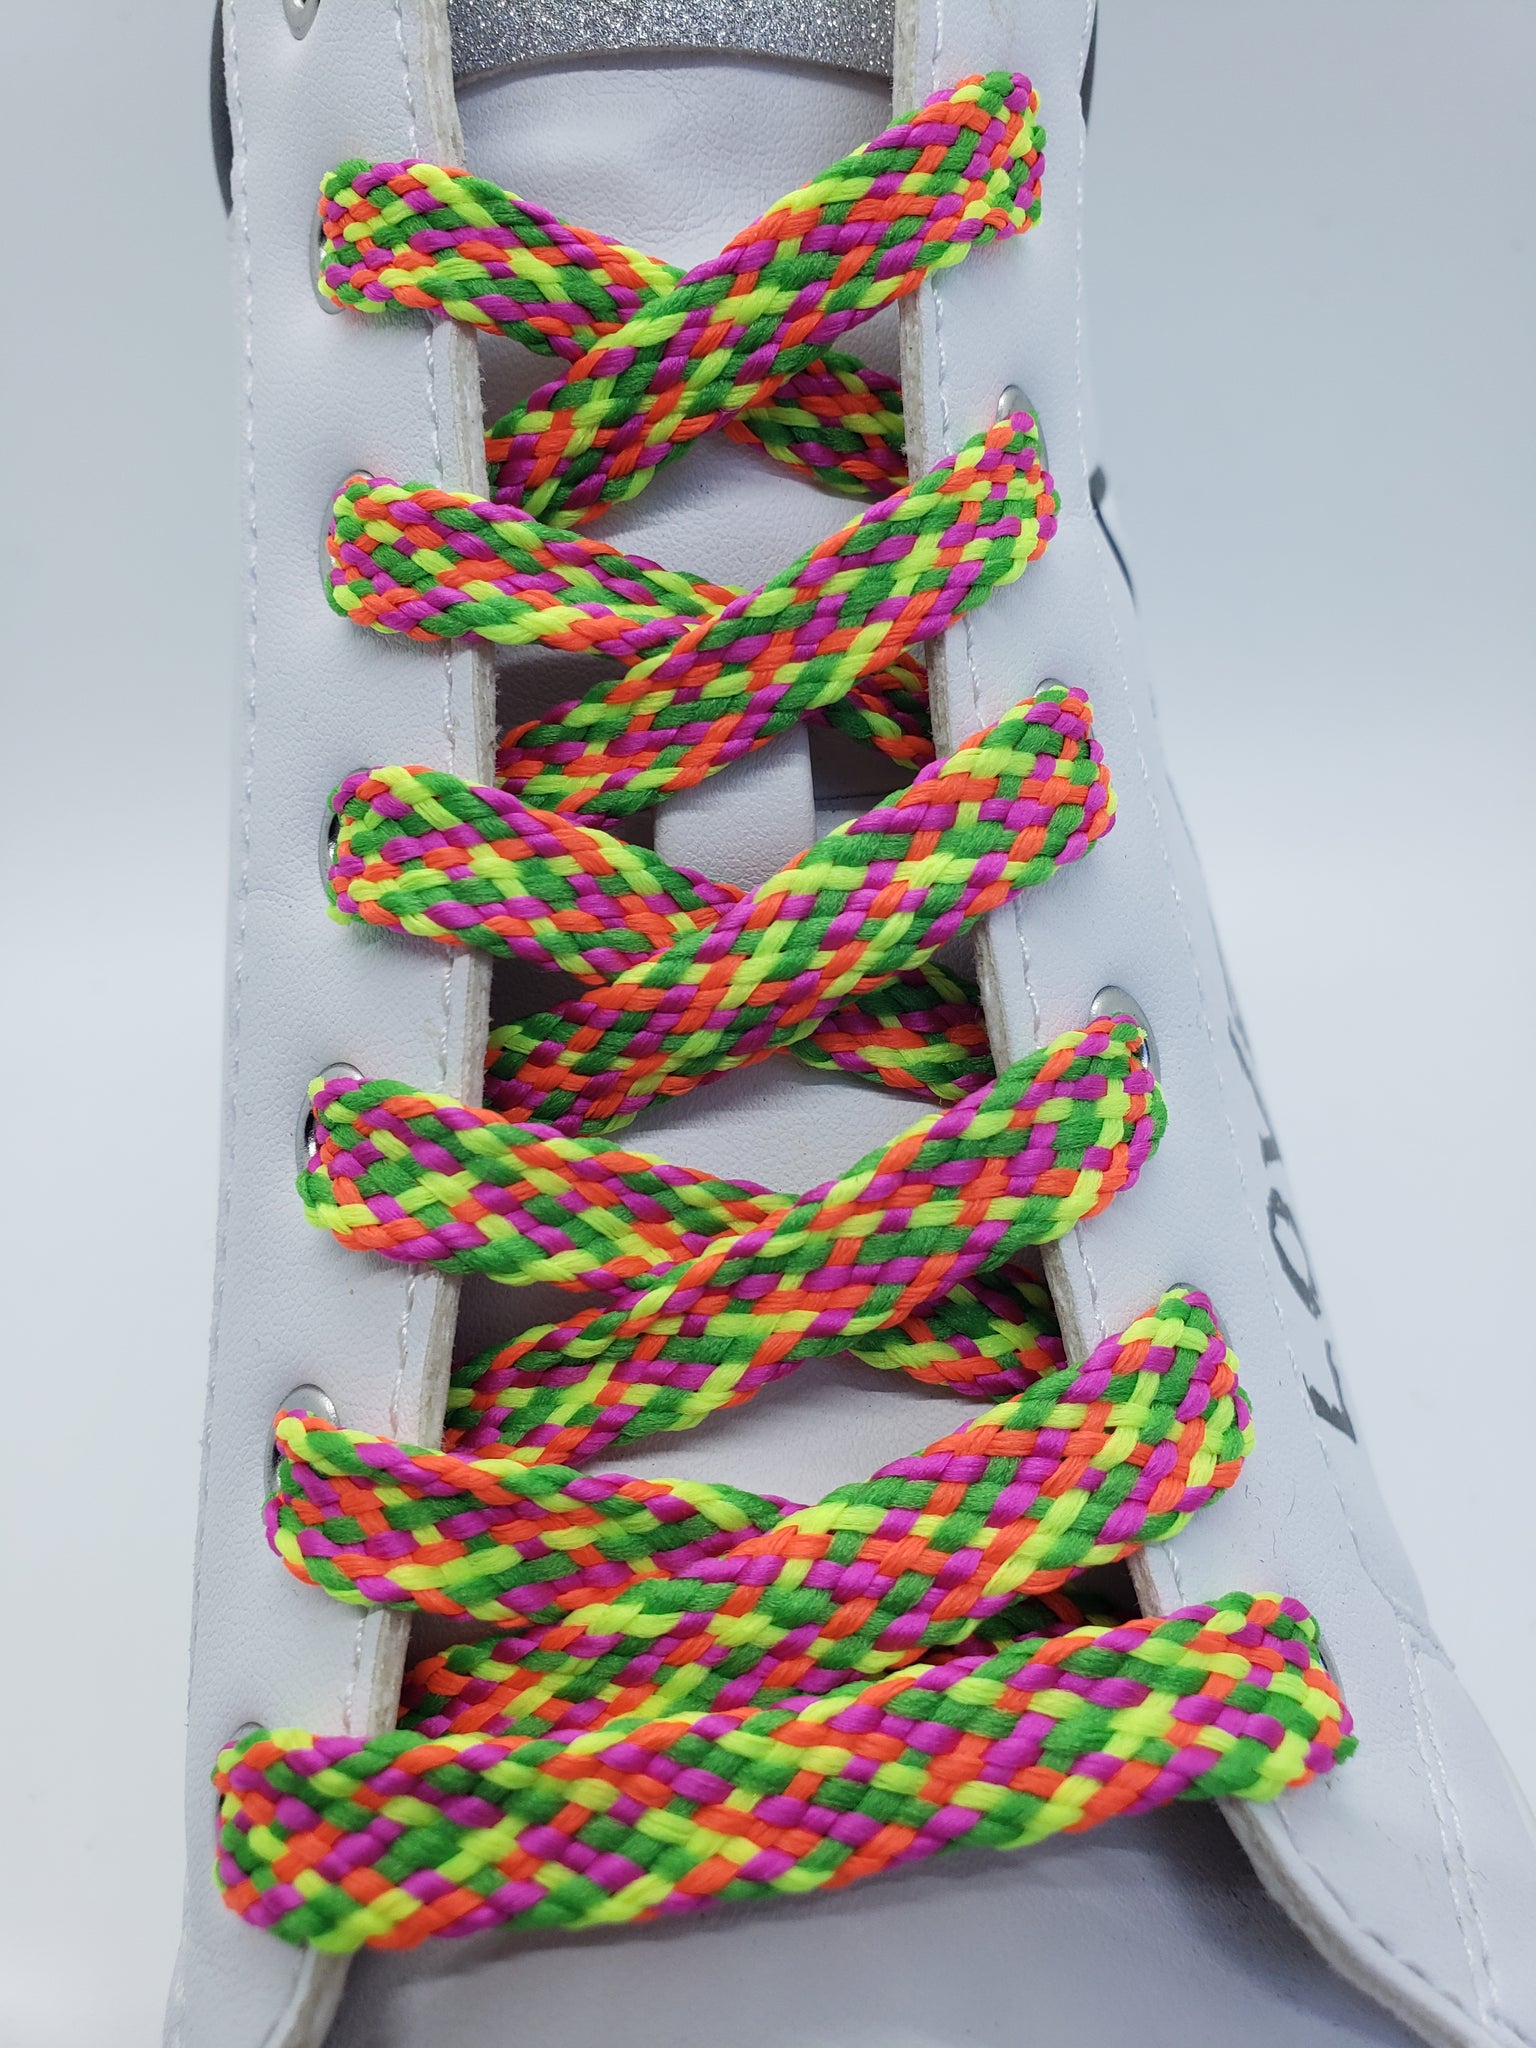 Flat Fluorescent Confetti Shoelaces - Yellow, Green, Orange and Pink